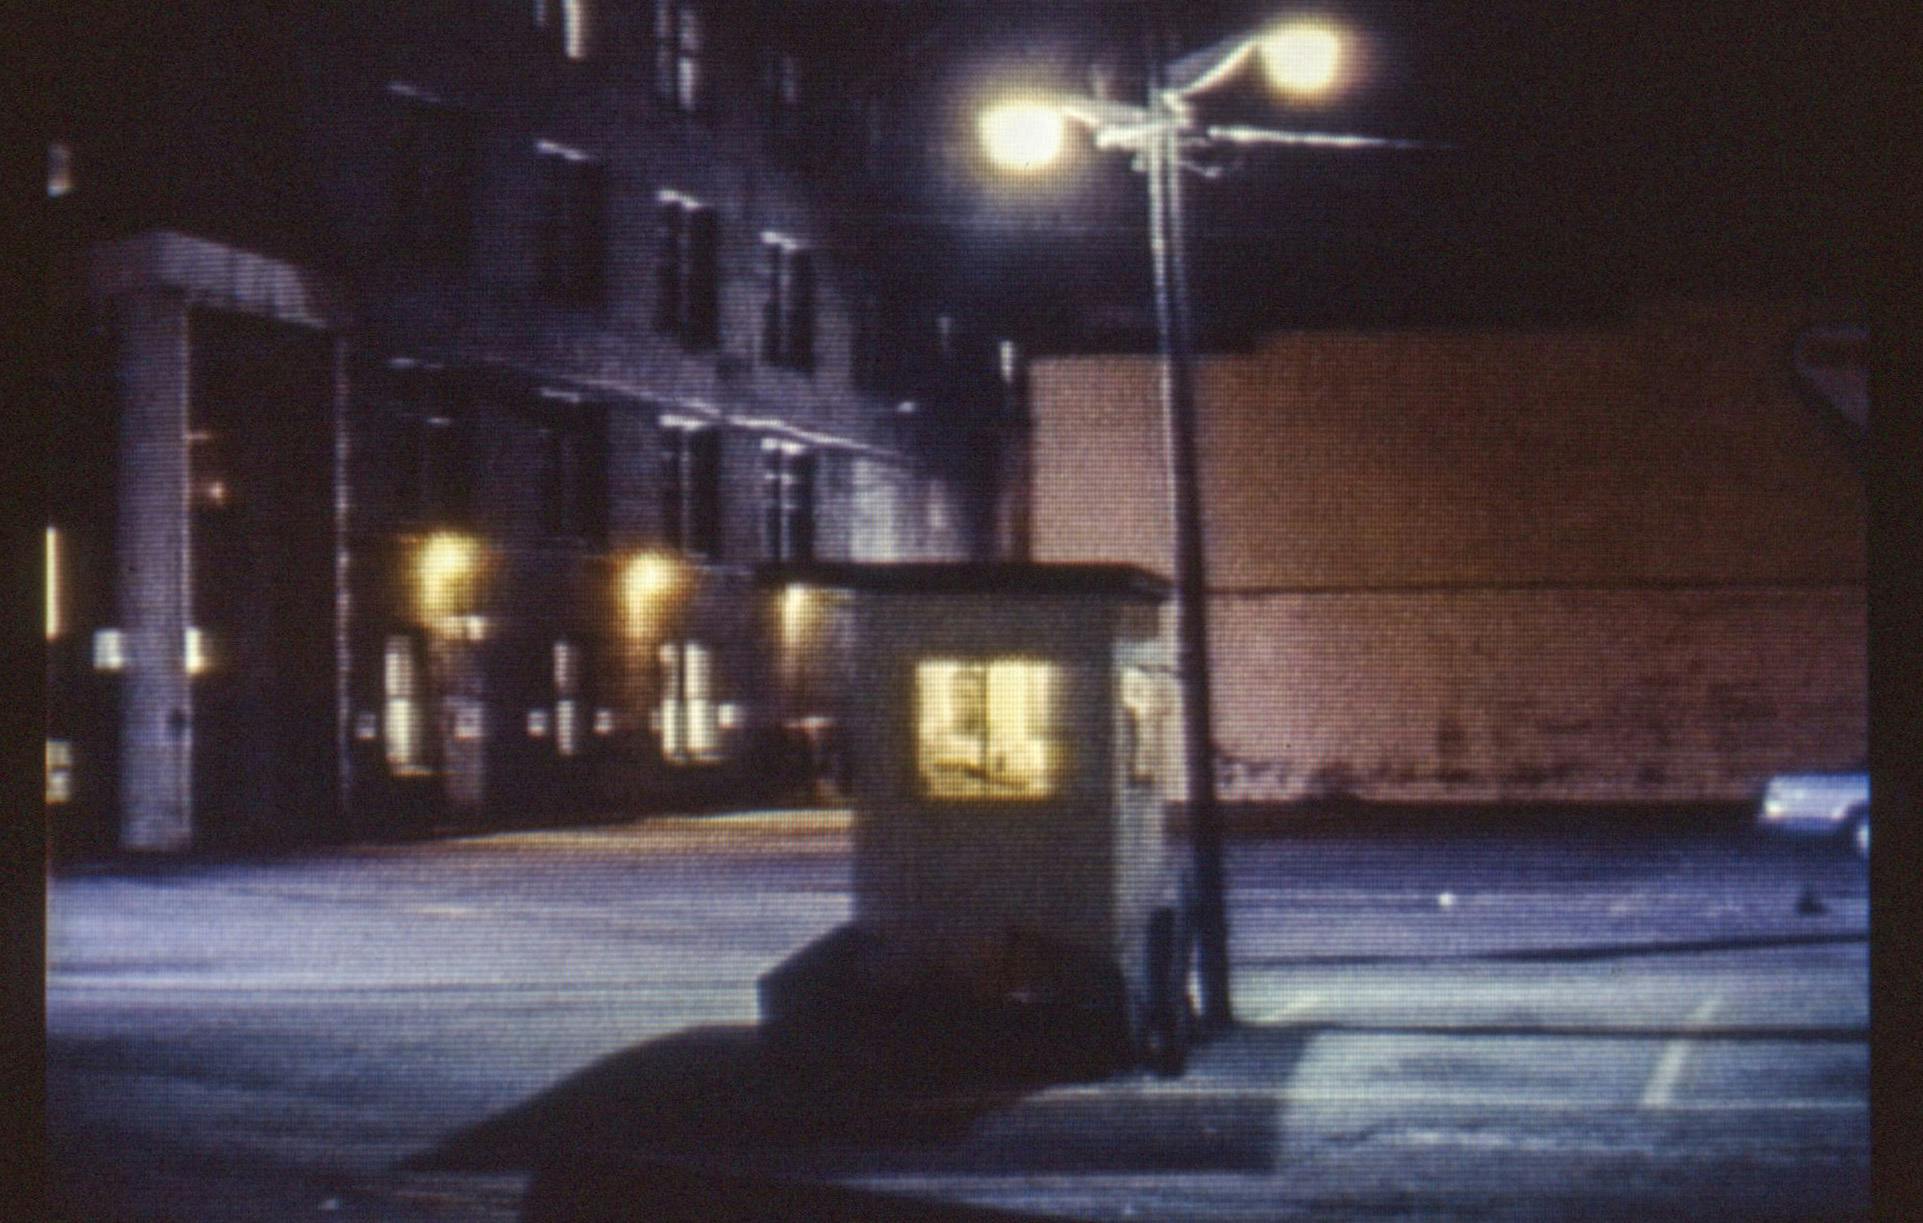 A still image from a film on a small screen. The photo is a closeup, the grainy texture of the film is visible. The scene shown is an empty outdoor parking lot at night, with a person at the pay booth.